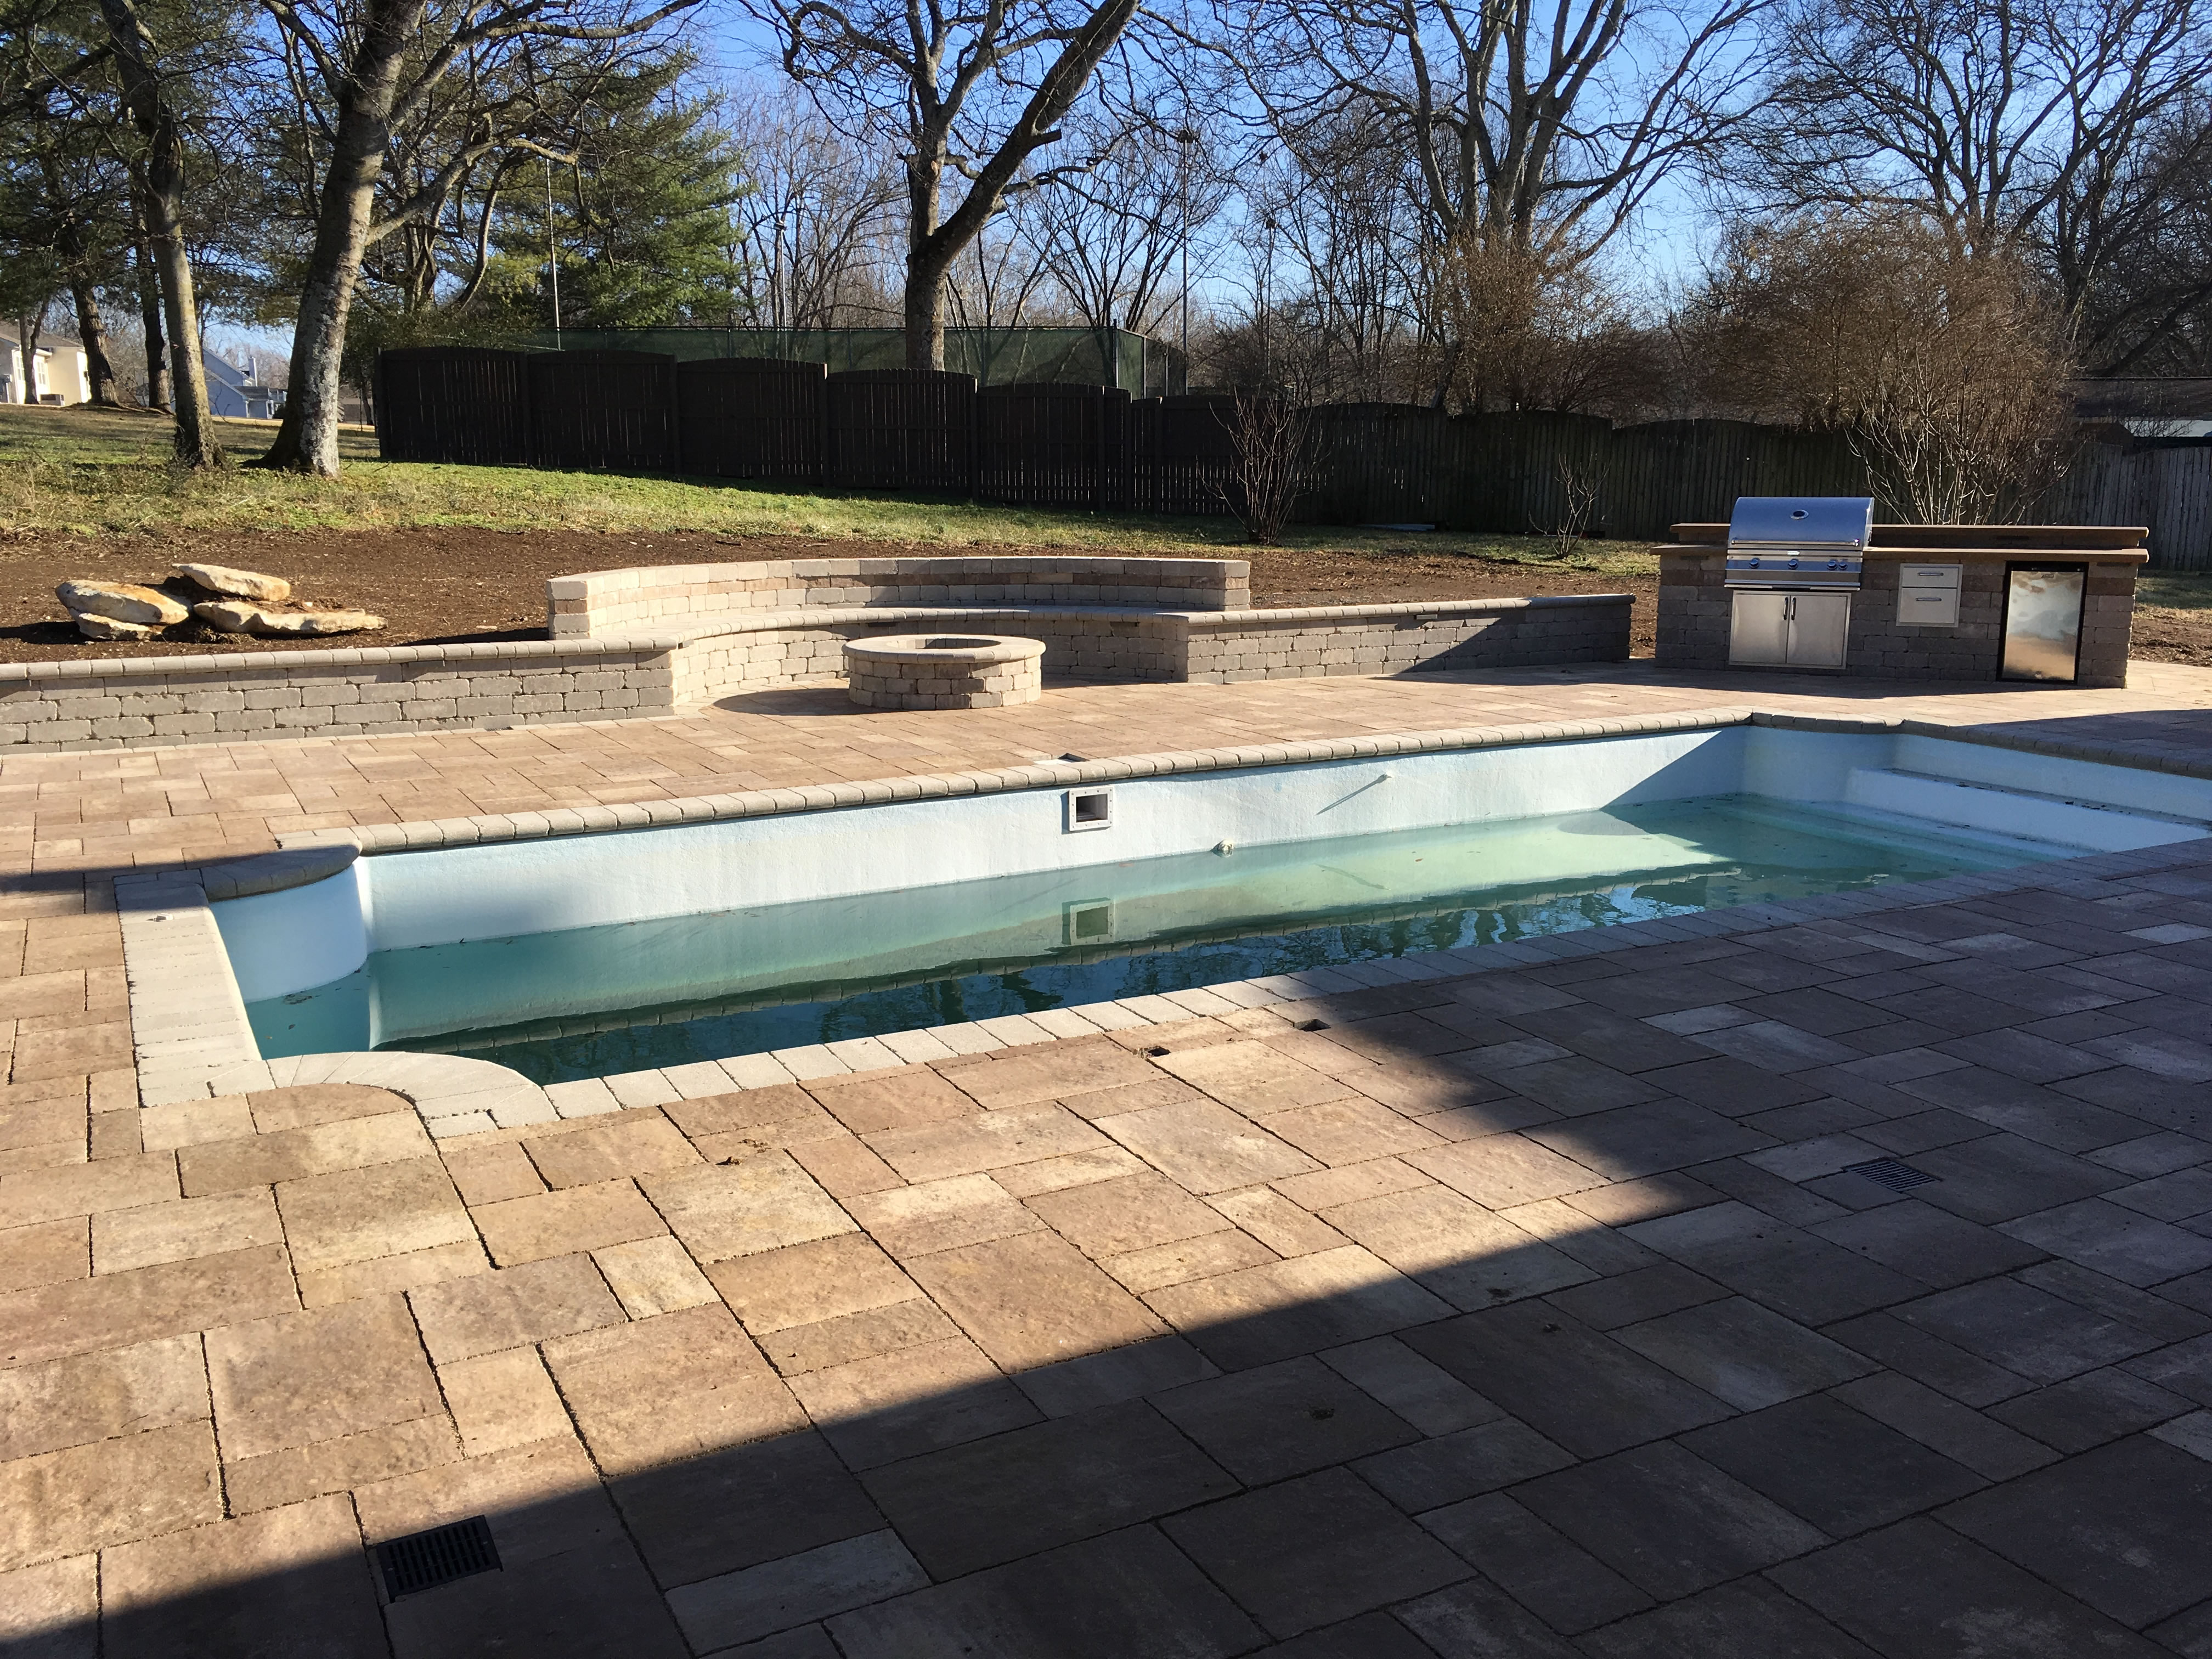 Pool Deck Paver Patio Firepit And Seating Walls Project In Mt Juliet Tn